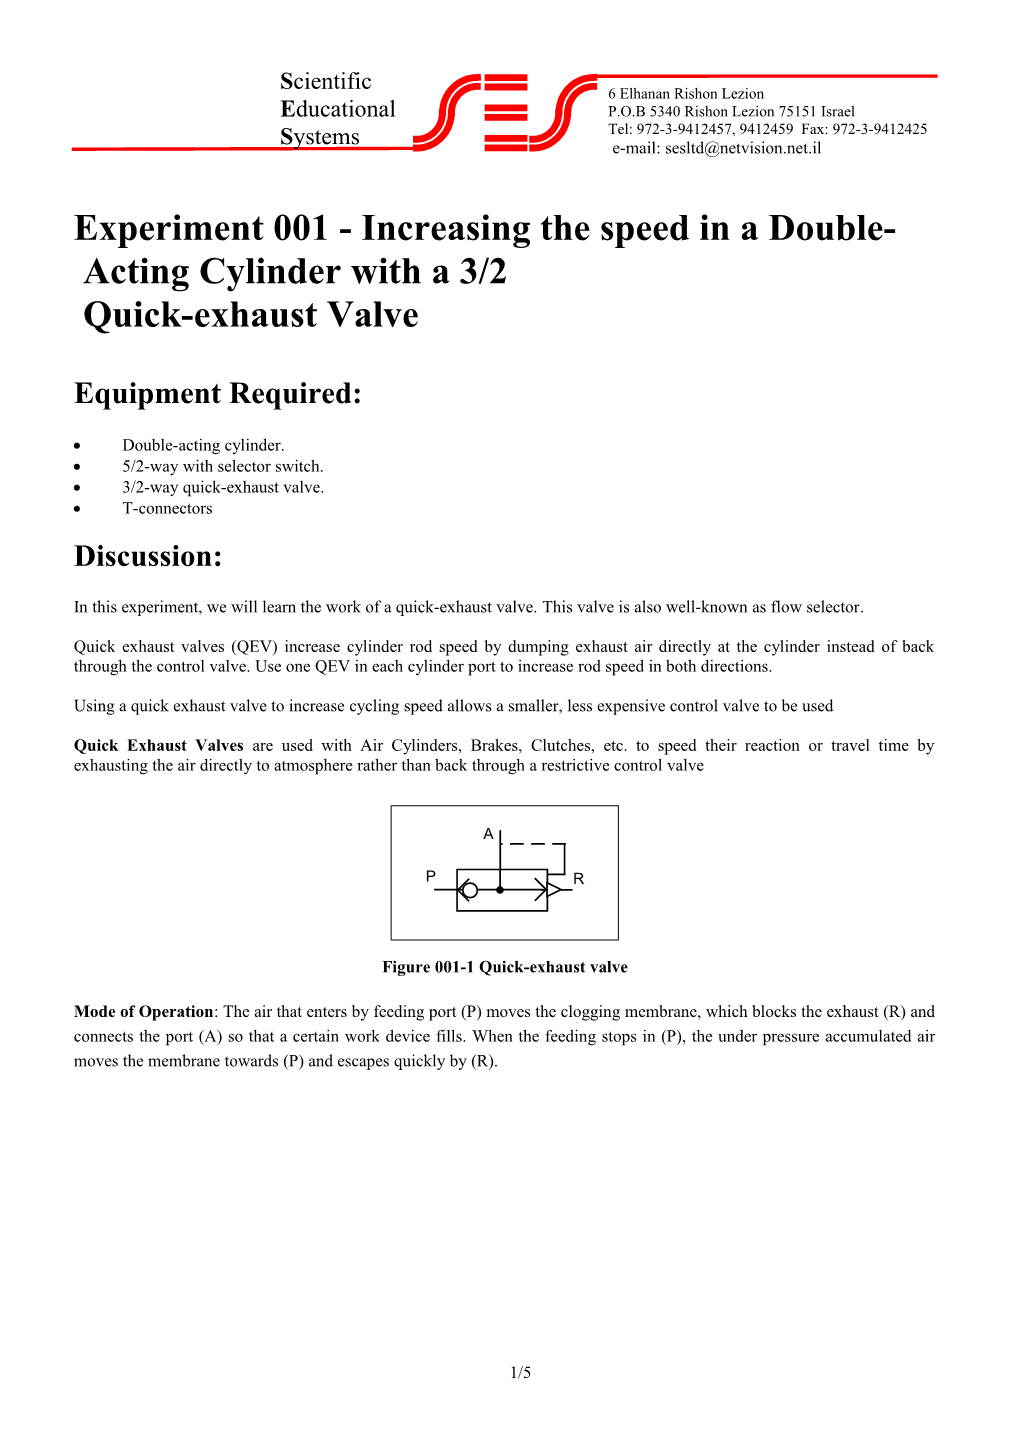 Experiment 001 - Increasing the Speed in a Double-Acting Cylinder with a 3/2